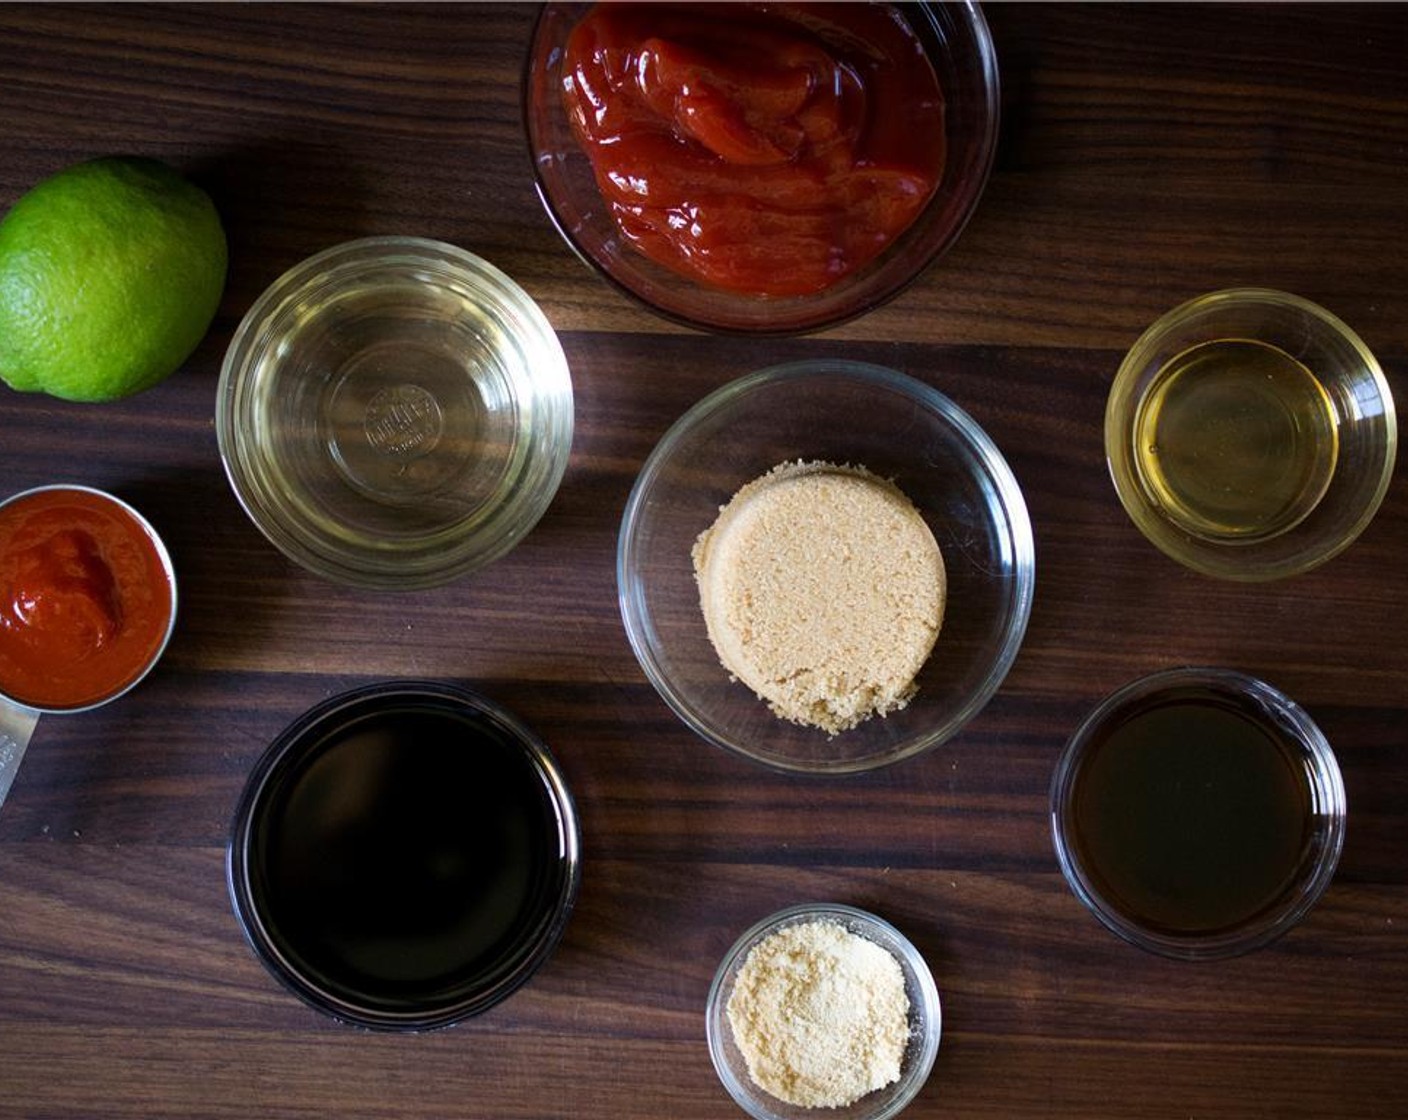 step 1 Prepare Olive Oil (1 Tbsp), Sriracha (1/4 cup), Soy Sauce (1/3 cup), Rice Vinegar (1/3 cup), Brown Sugar (1/3 cup), Ketchup (2/3 cup), juice from Lime (1), Worcestershire Sauce (2 Tbsp), Honey (1 Tbsp) and Onion Powder (1 tsp).